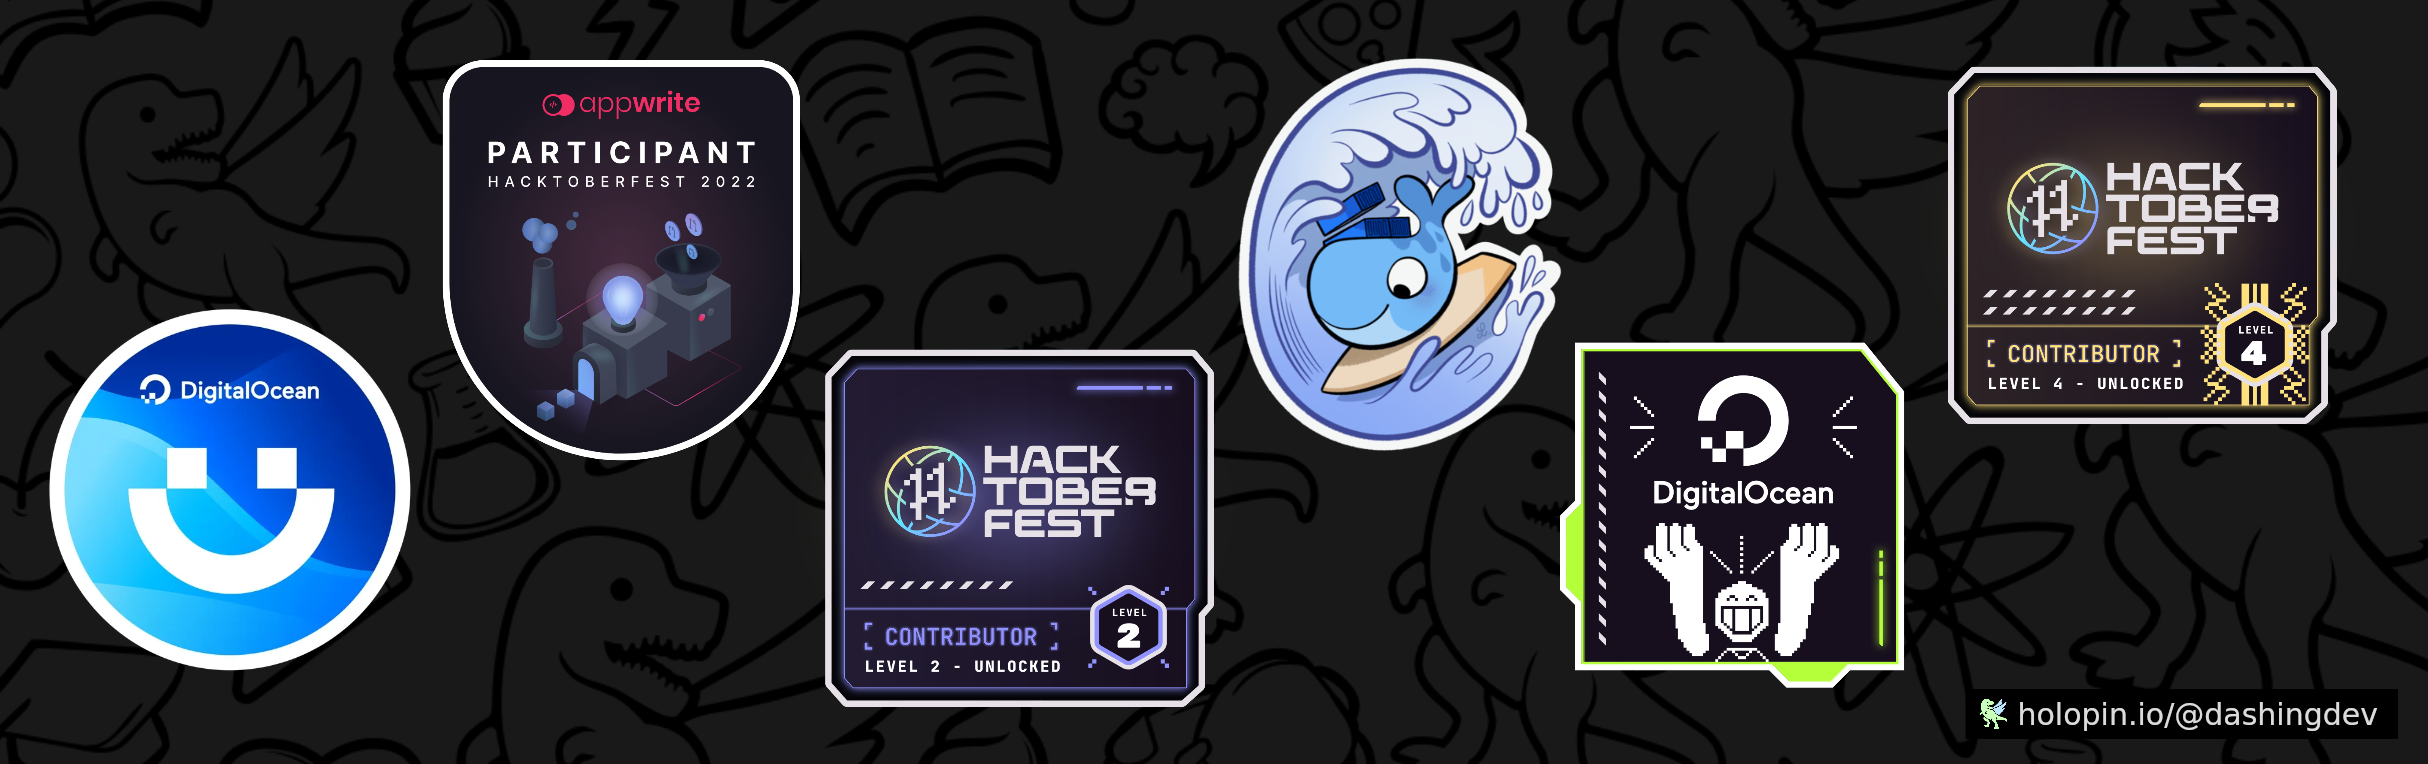 An image of @dashingdev's Holopin badges, which is a link to view their full Holopin profile